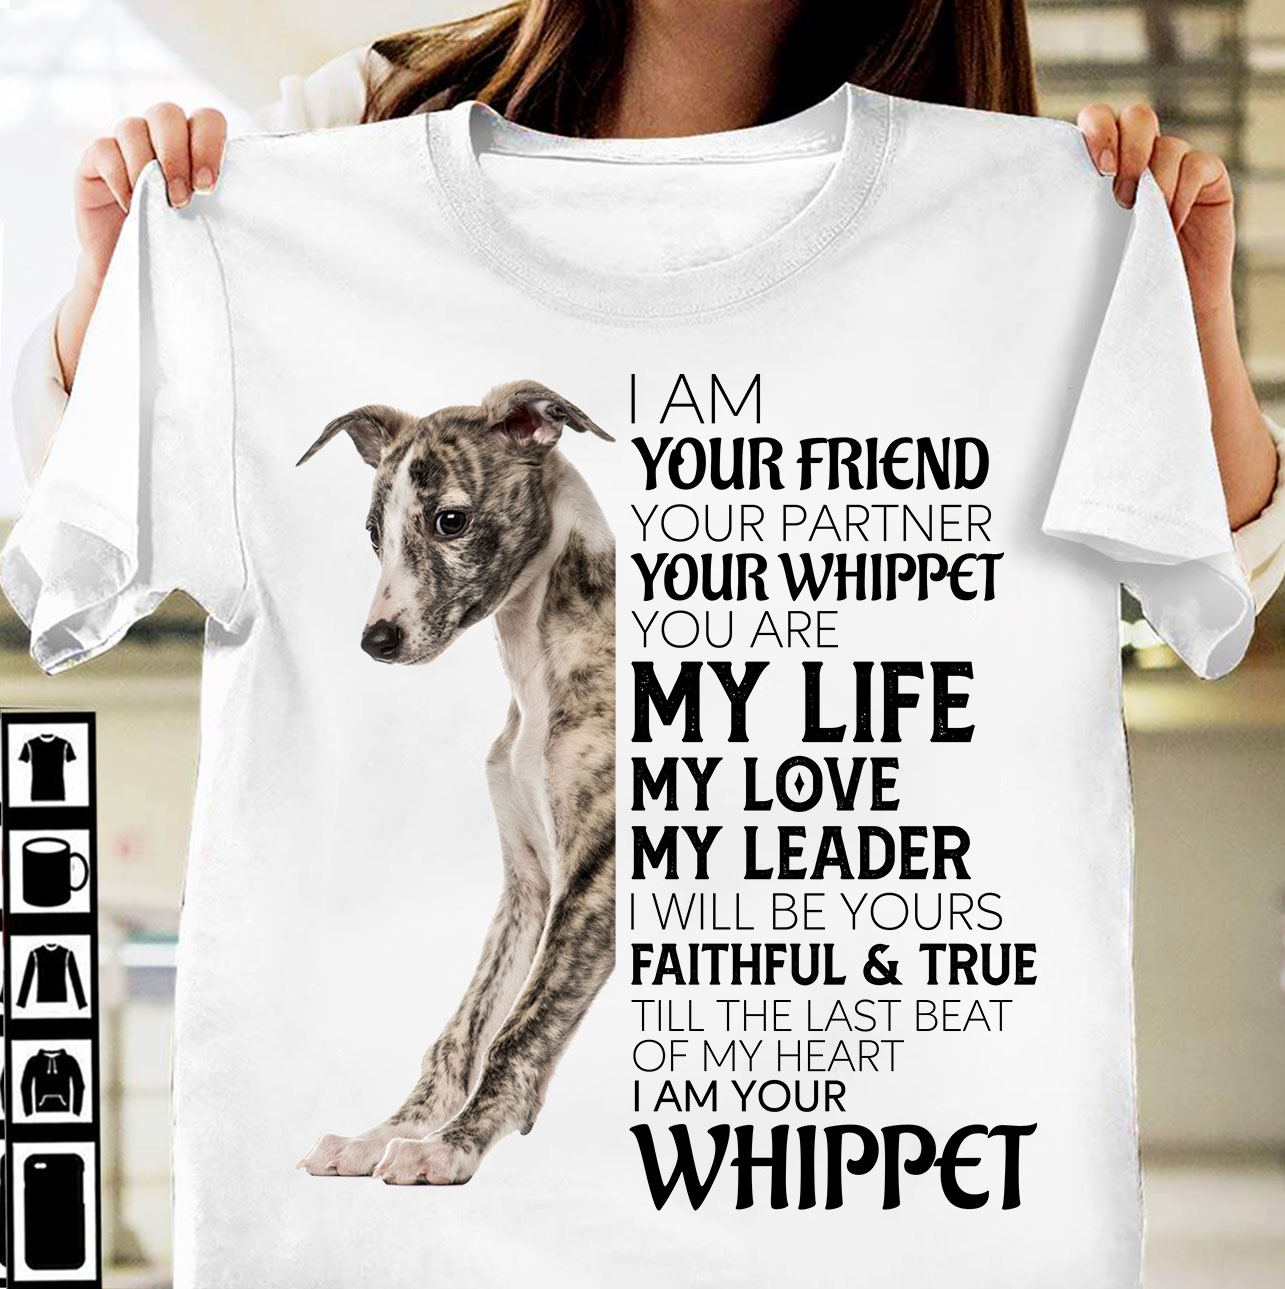 I am your friend, your partner, your whippet - Whippet dog